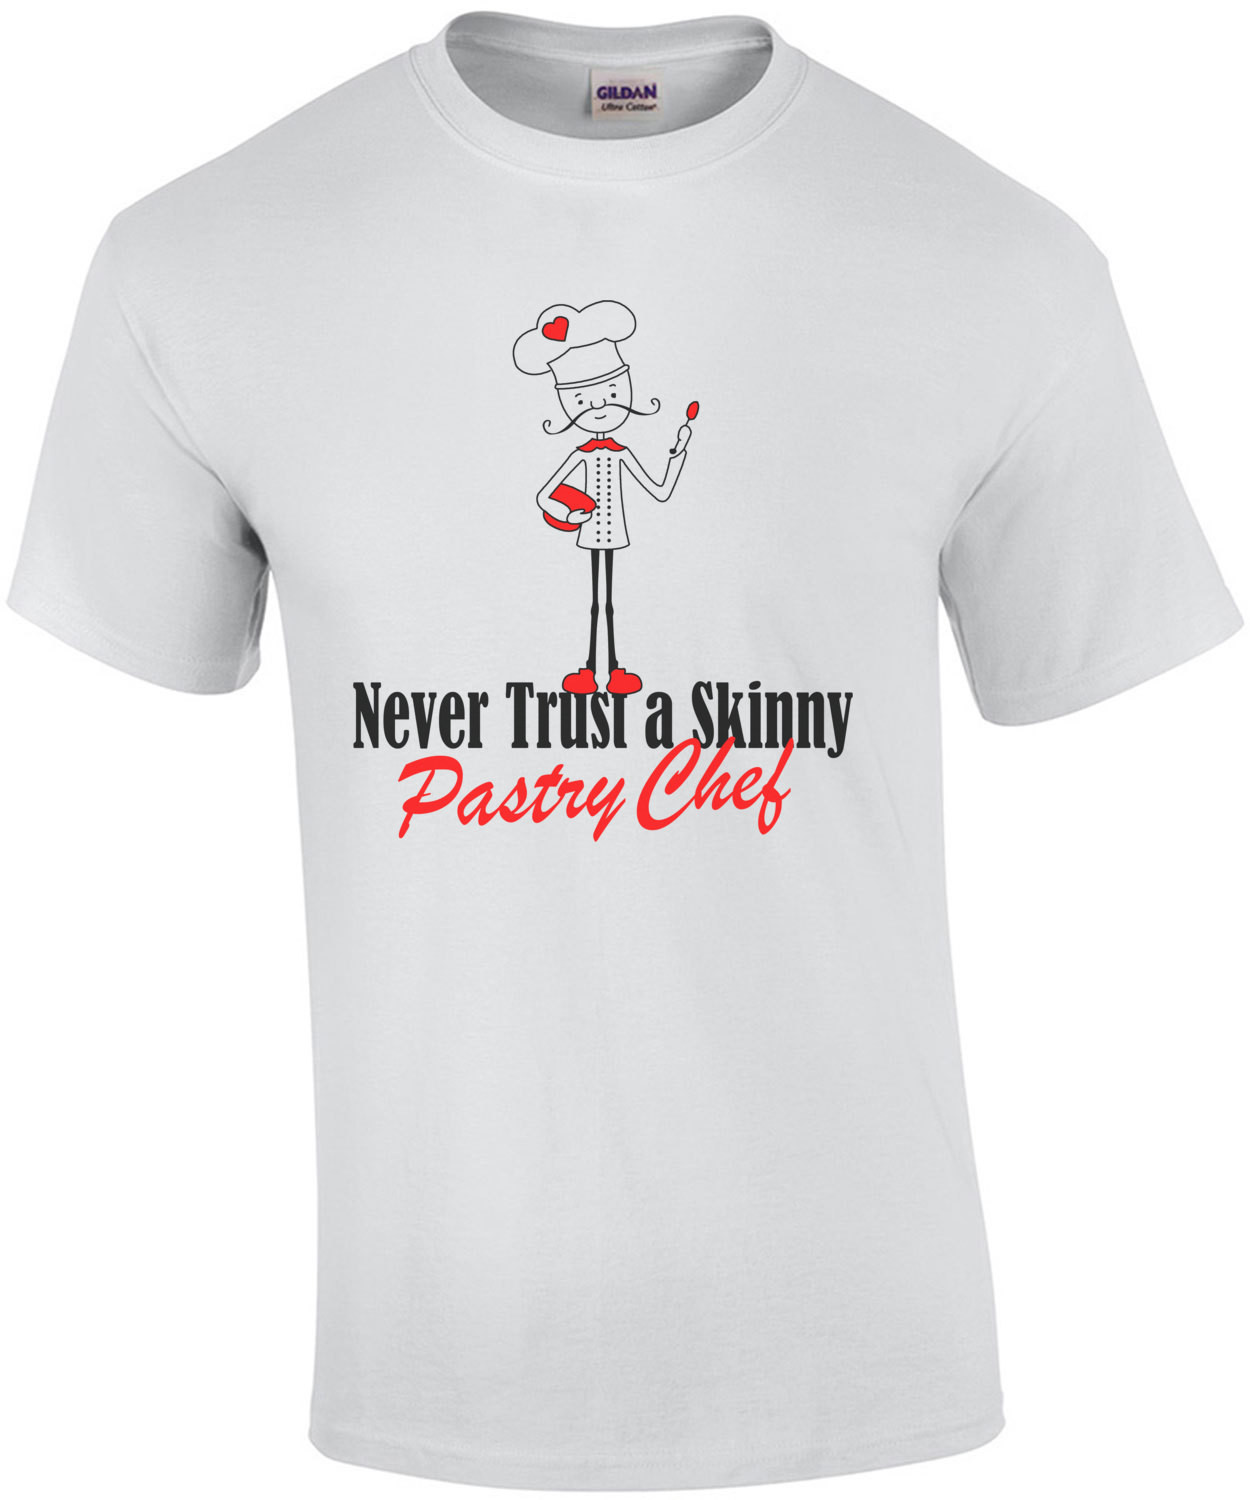 Never Trust A Skinny Pastry Chef T-Shirt